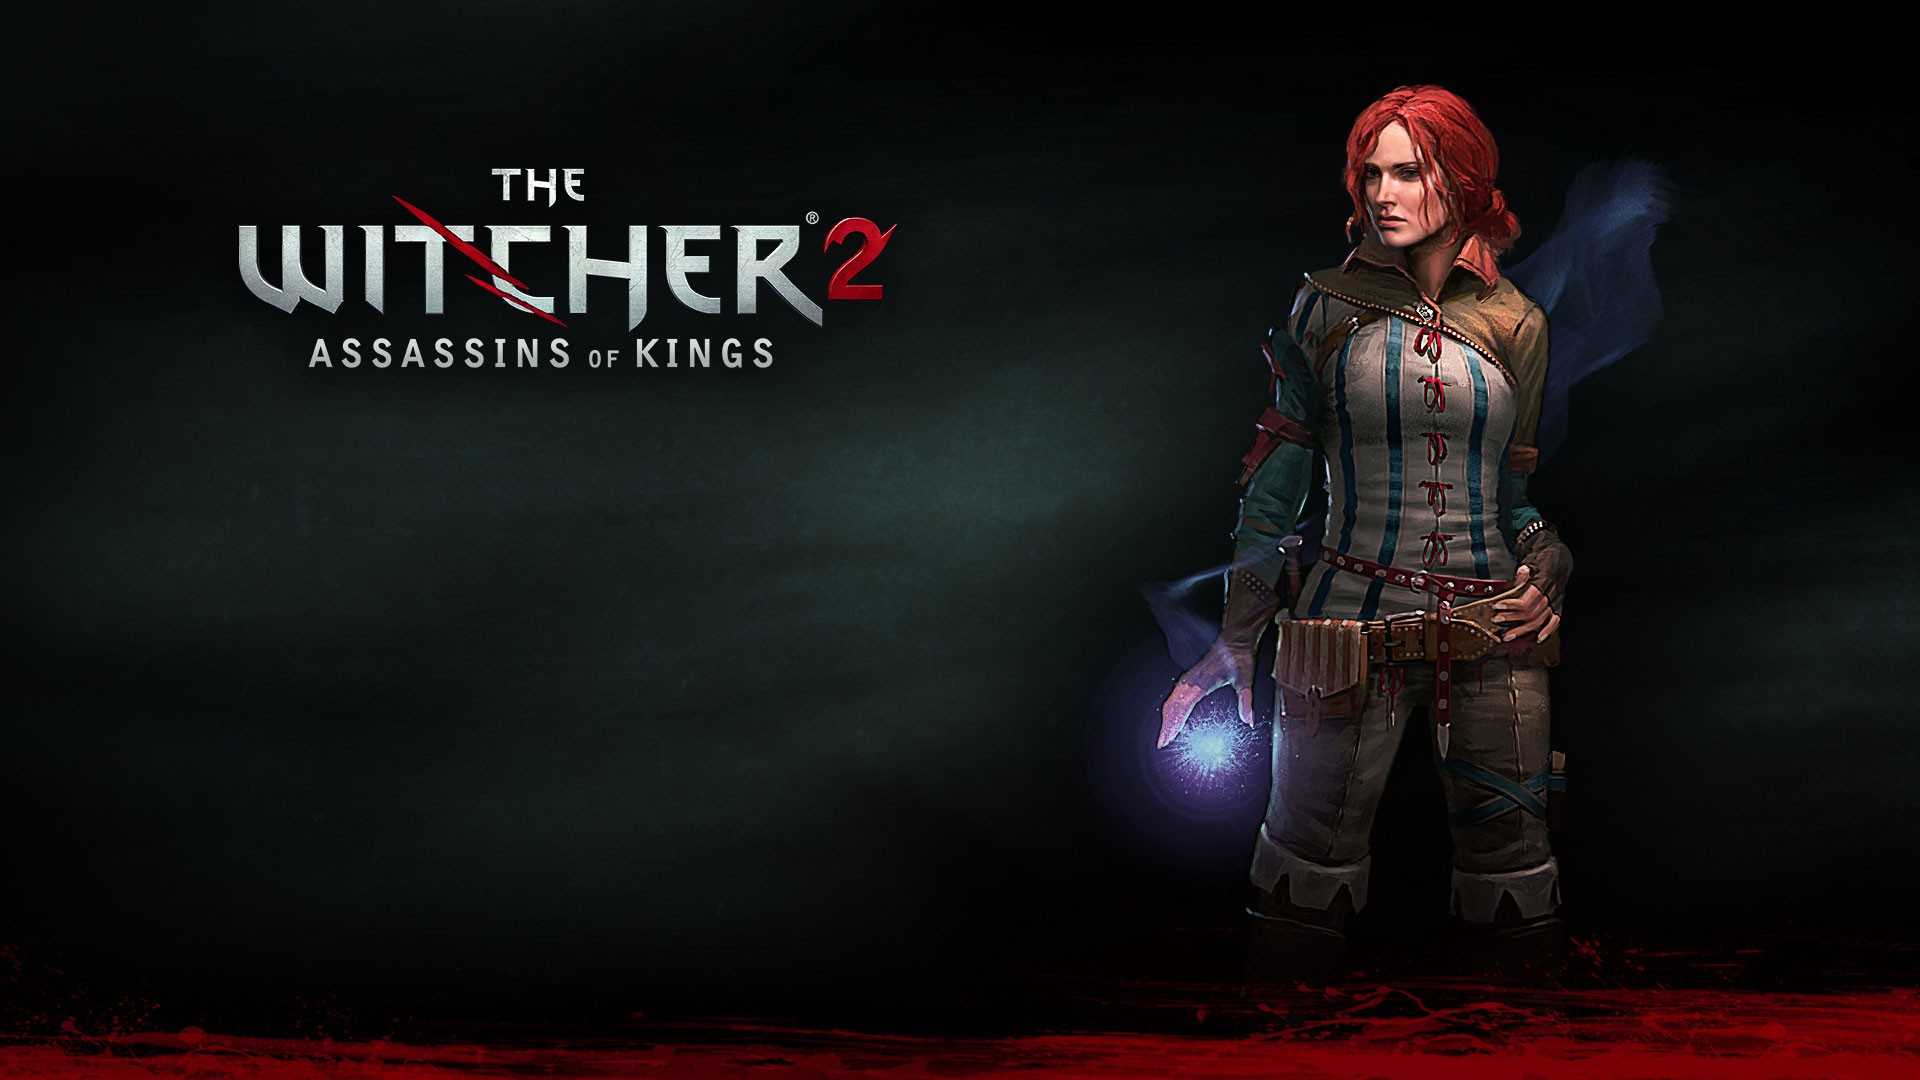 the witcher 2 assassins of kings version 2.0